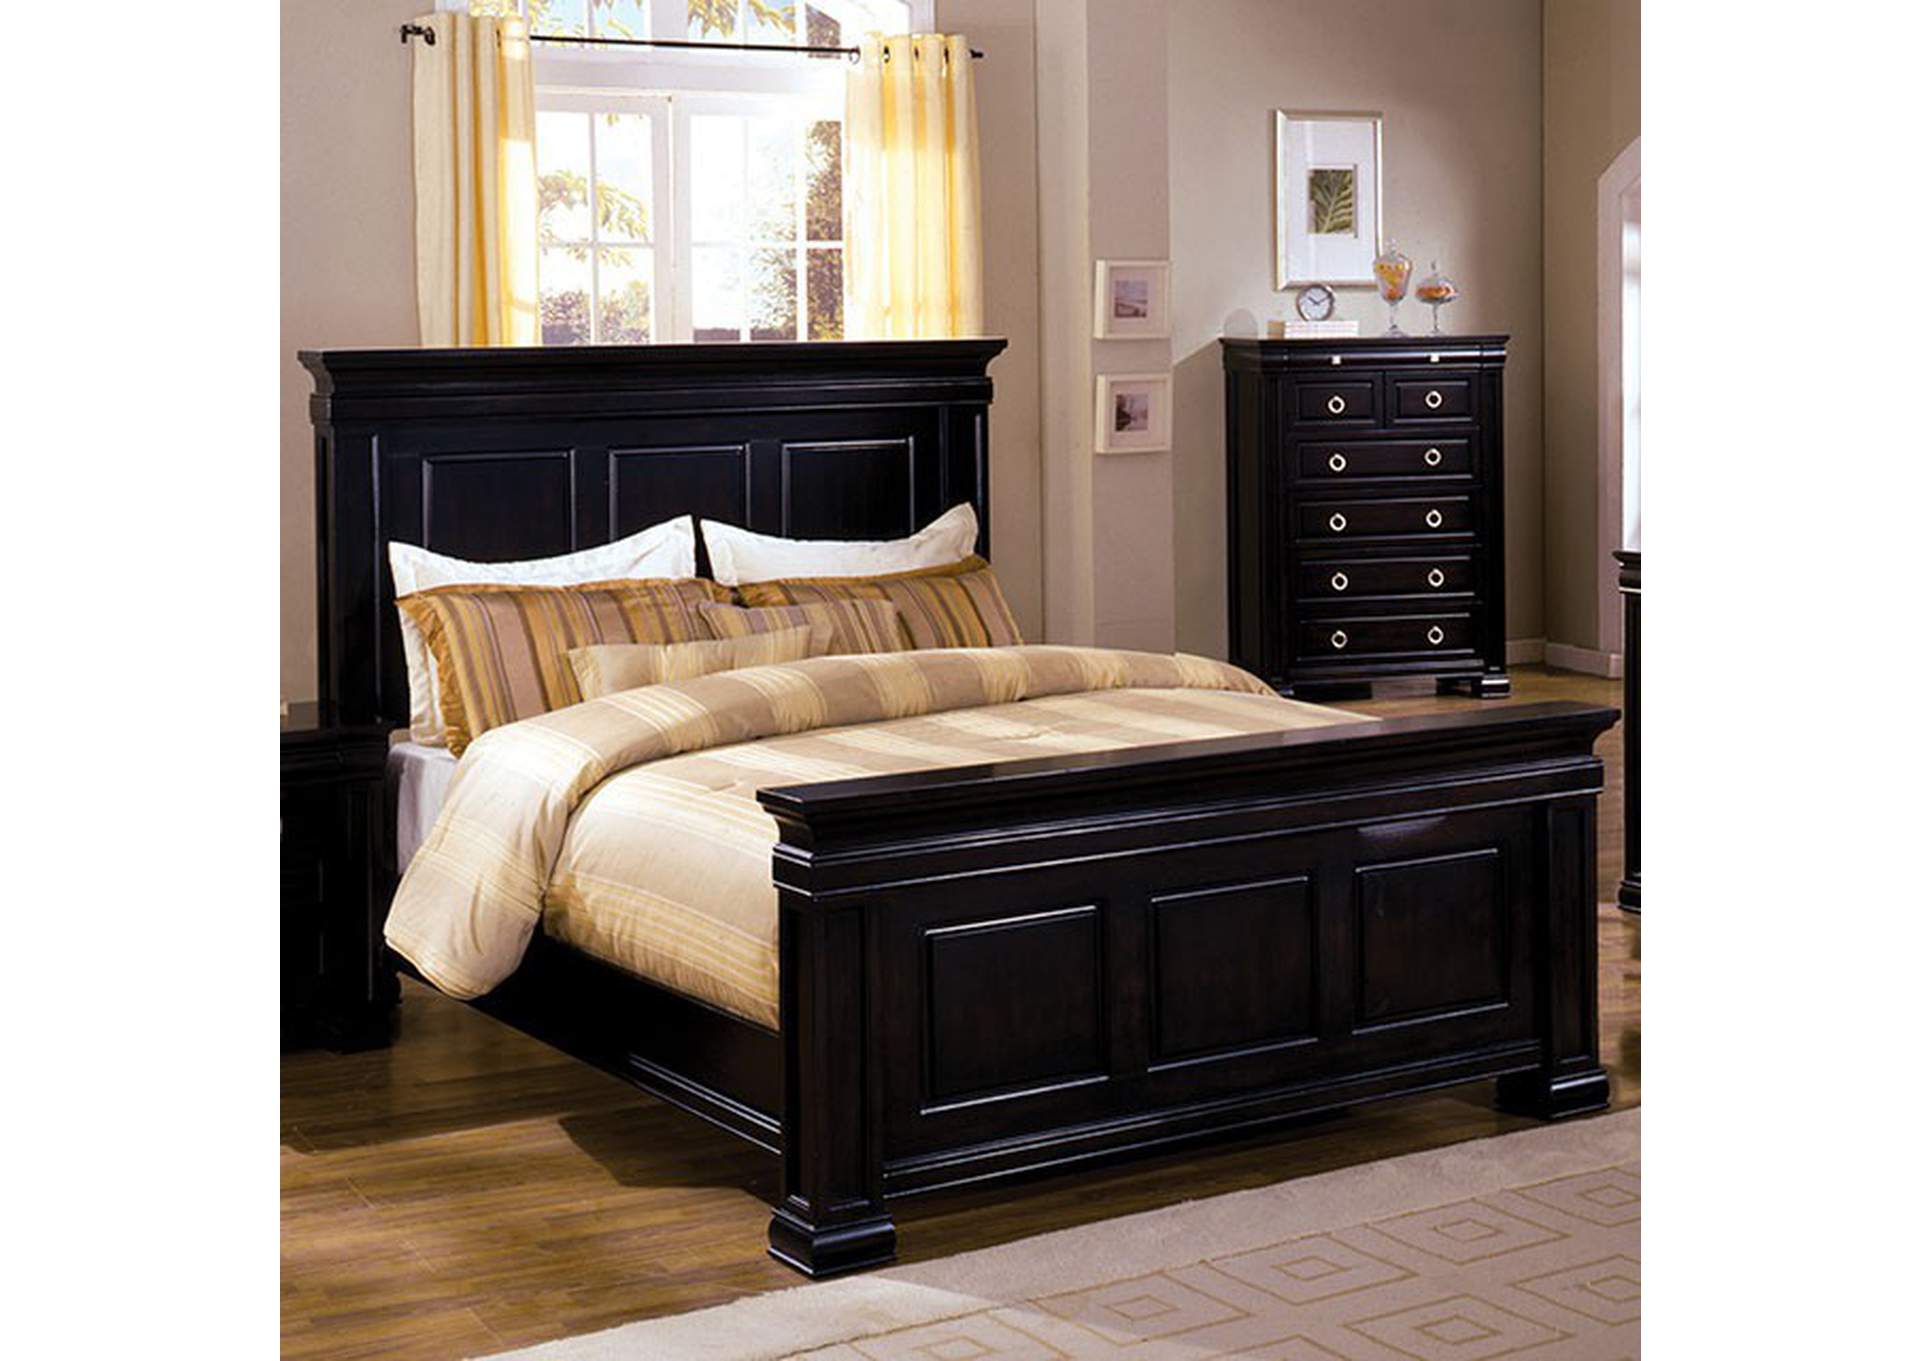 Cambridge Eastern King Bed Gaby S Furniture, Eastern California King Bed